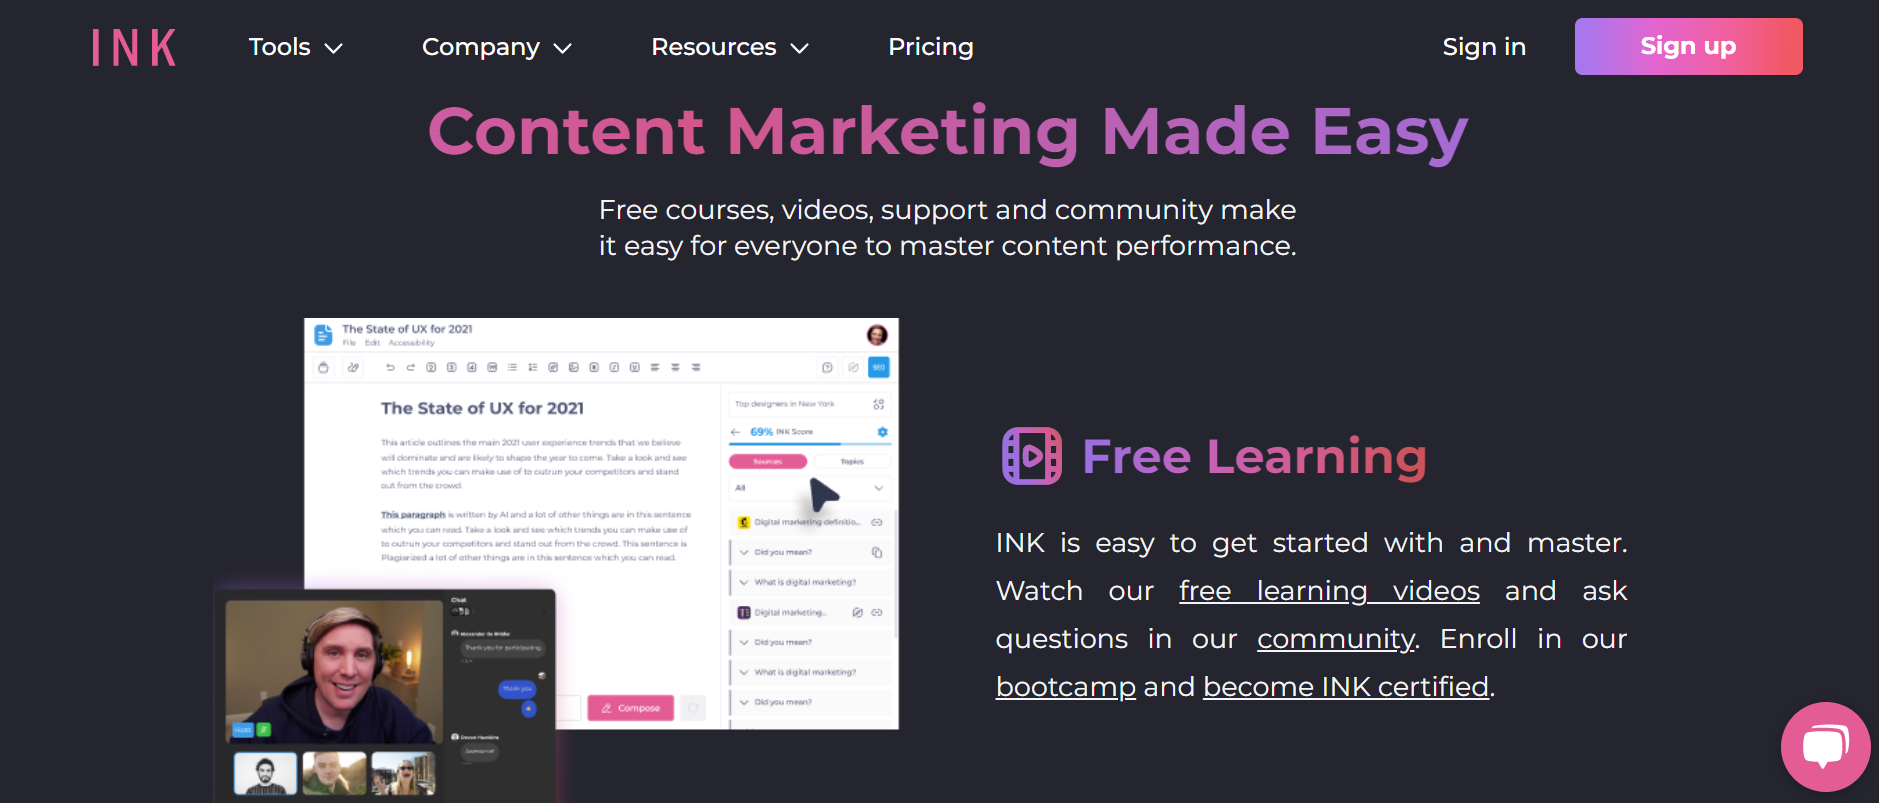 INK for All Landing Page - "Content Marketing Made Easy" 